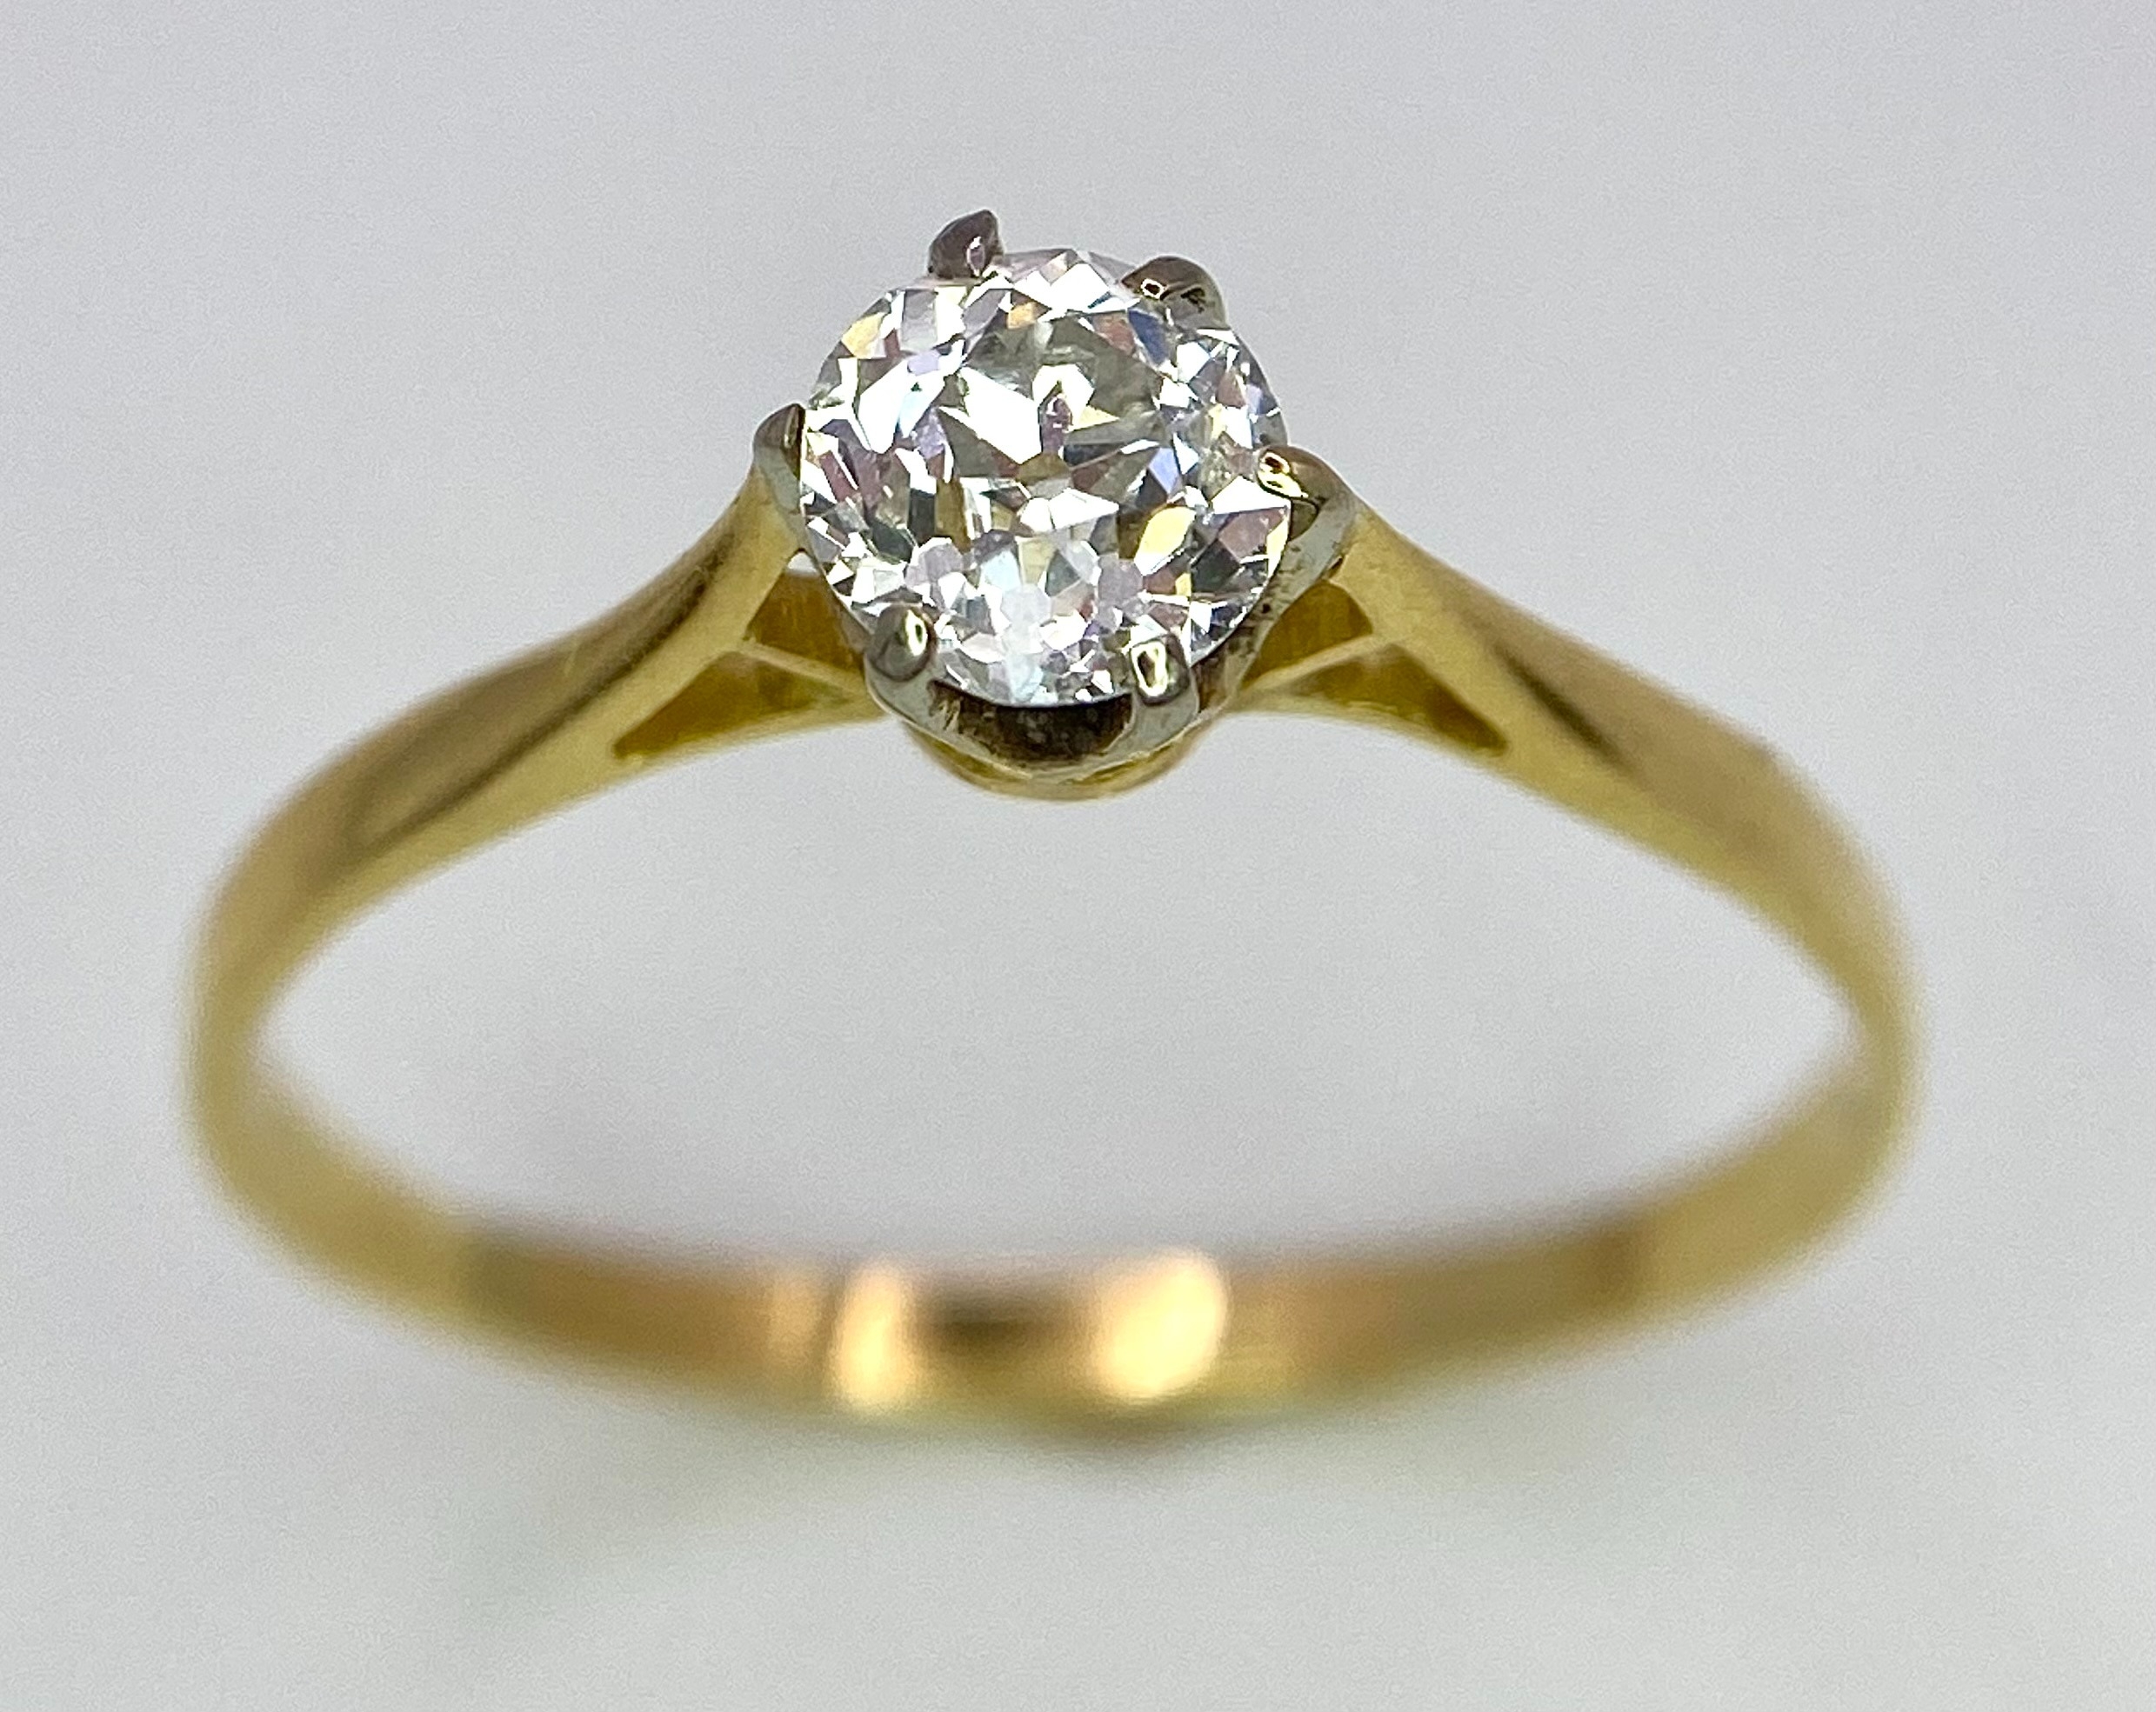 AN 18K YELLOW GOLD, OLD CUT DIAMOND SOLITAIRE RING. 0.40CT. 1.5G. SIZE P 1/2.